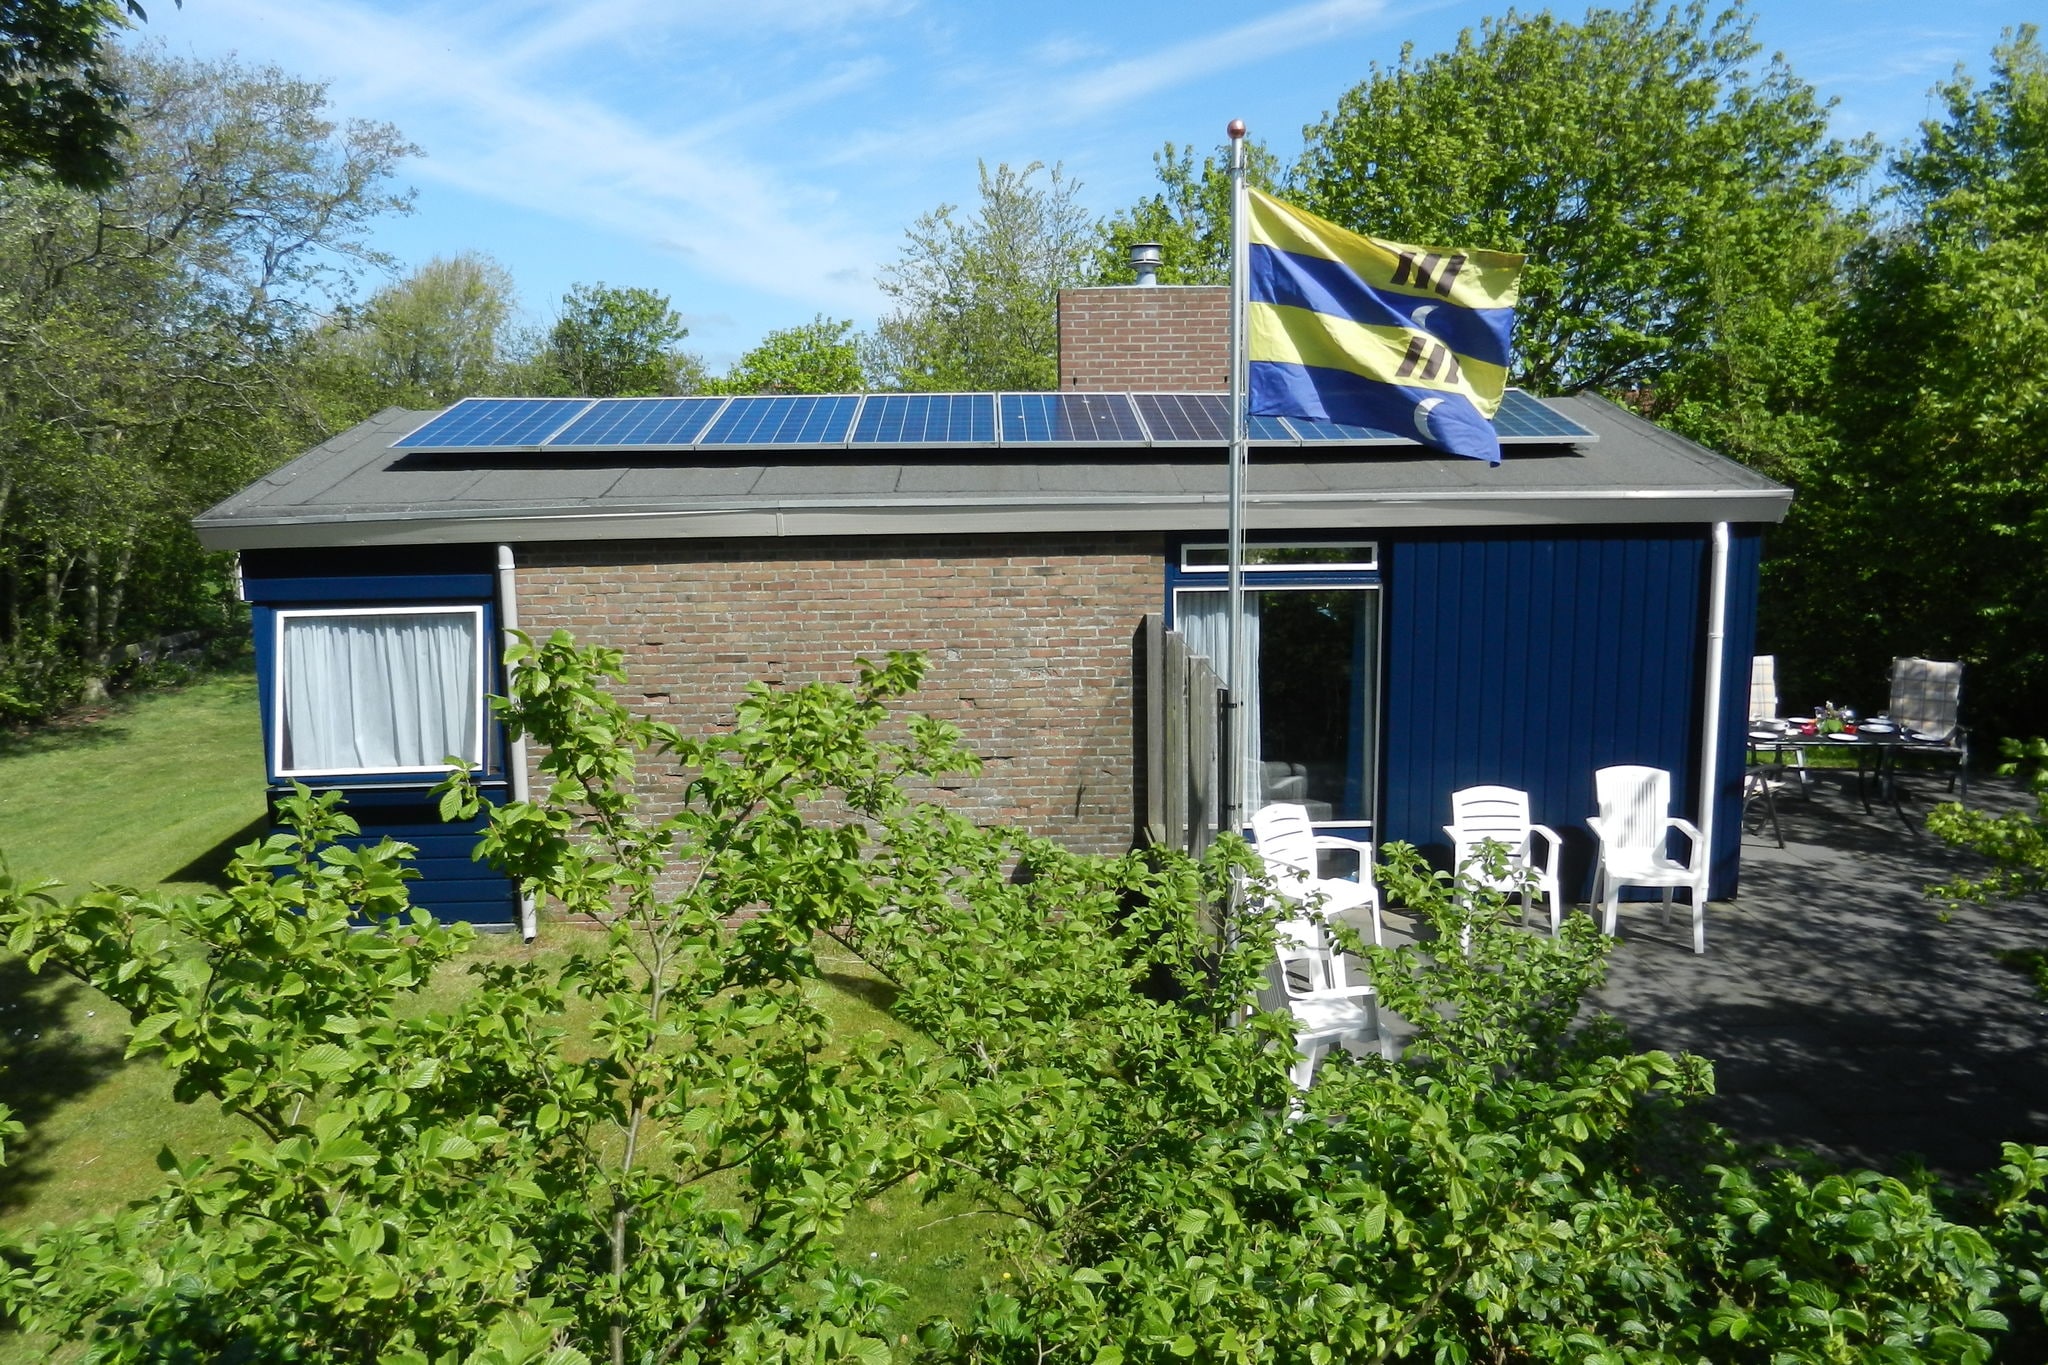 Detached bungalow in Nes on Ameland with spacious terrace